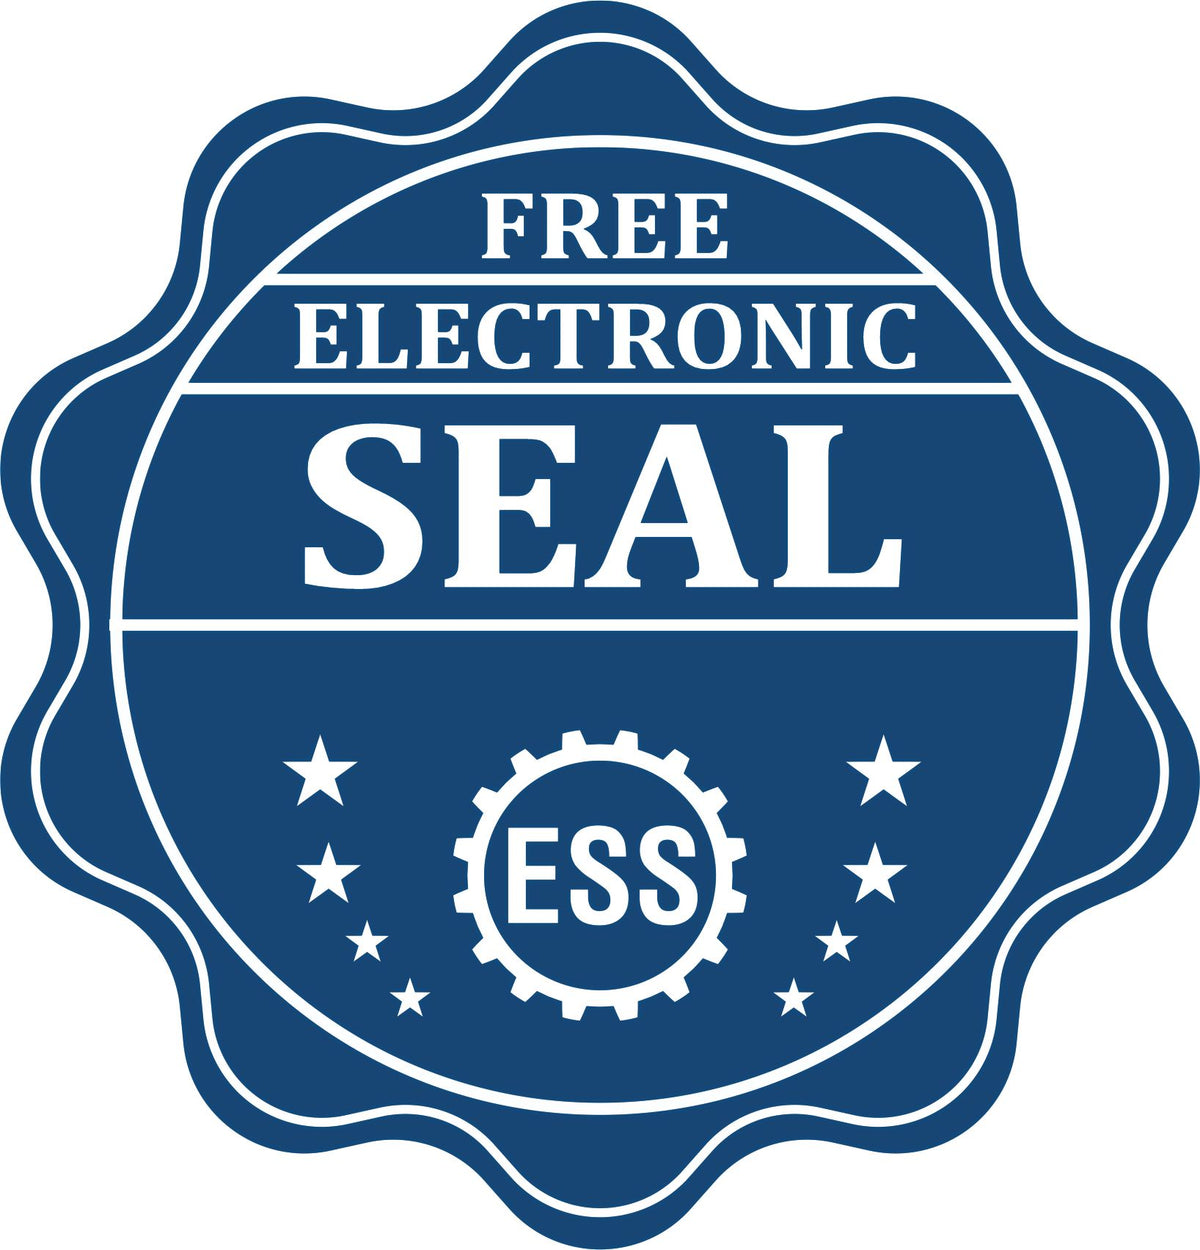 A badge showing a free electronic seal for the PSI Oregon Notary Stamp with stars and the ESS gear on the emblem.